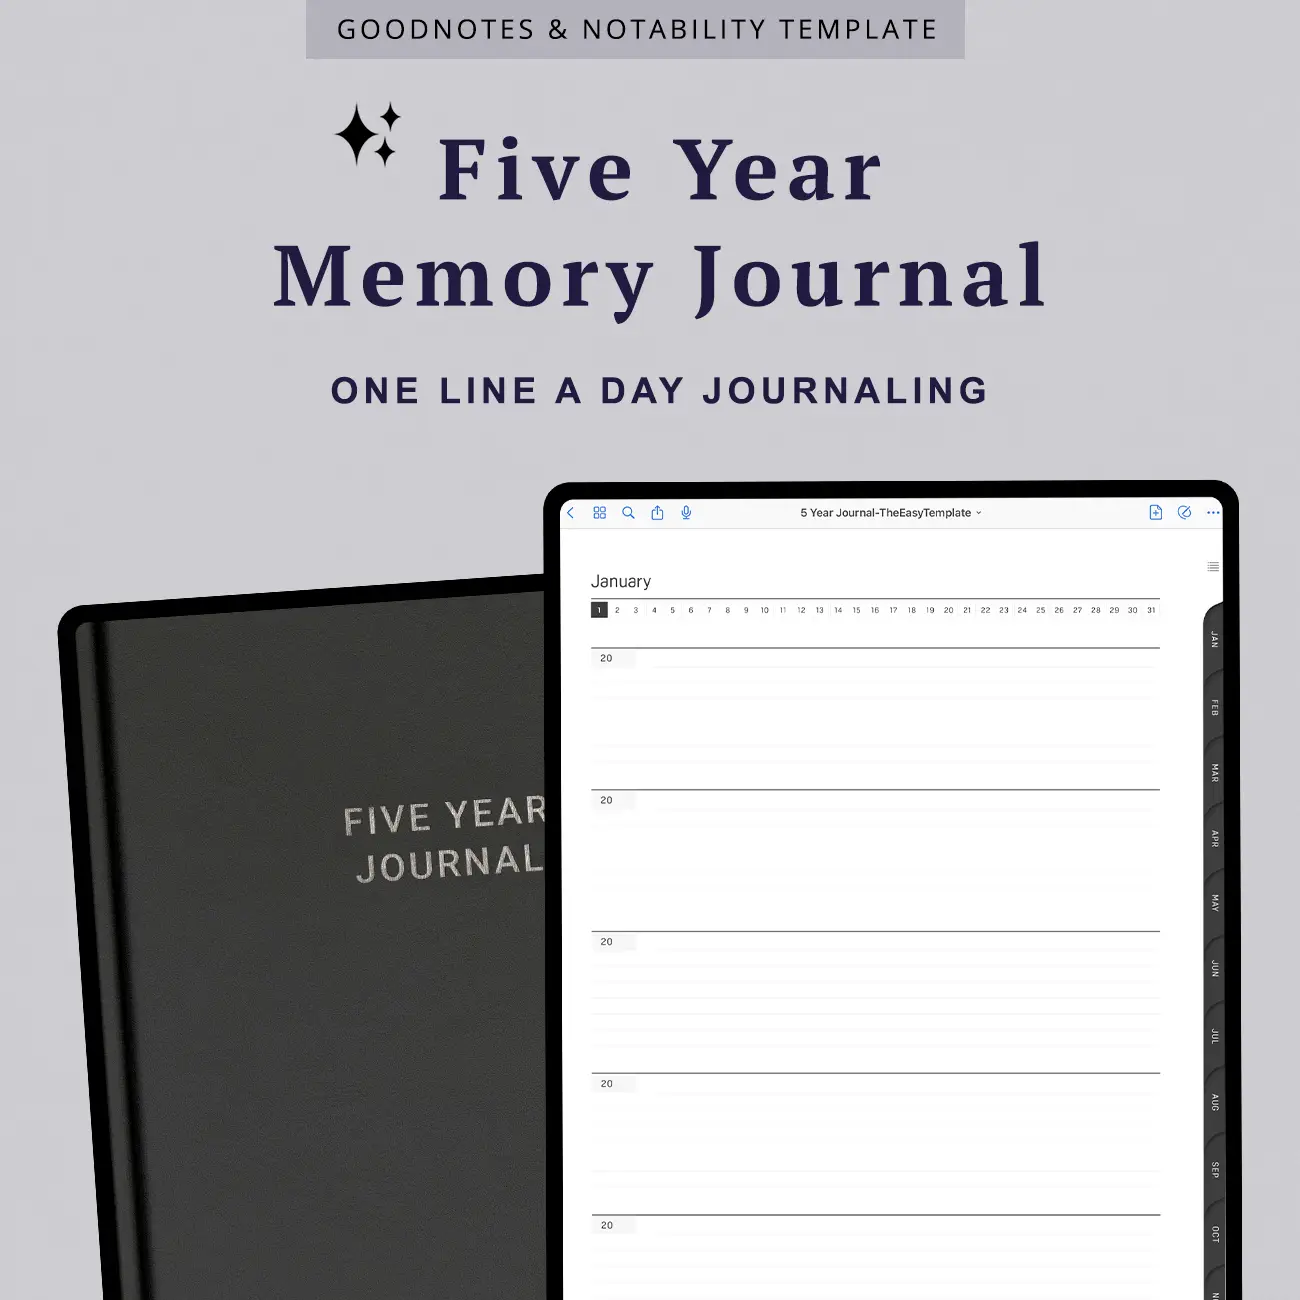 One Line a Day Digital Daily Journal, 5 Year Journal, Goodnotes